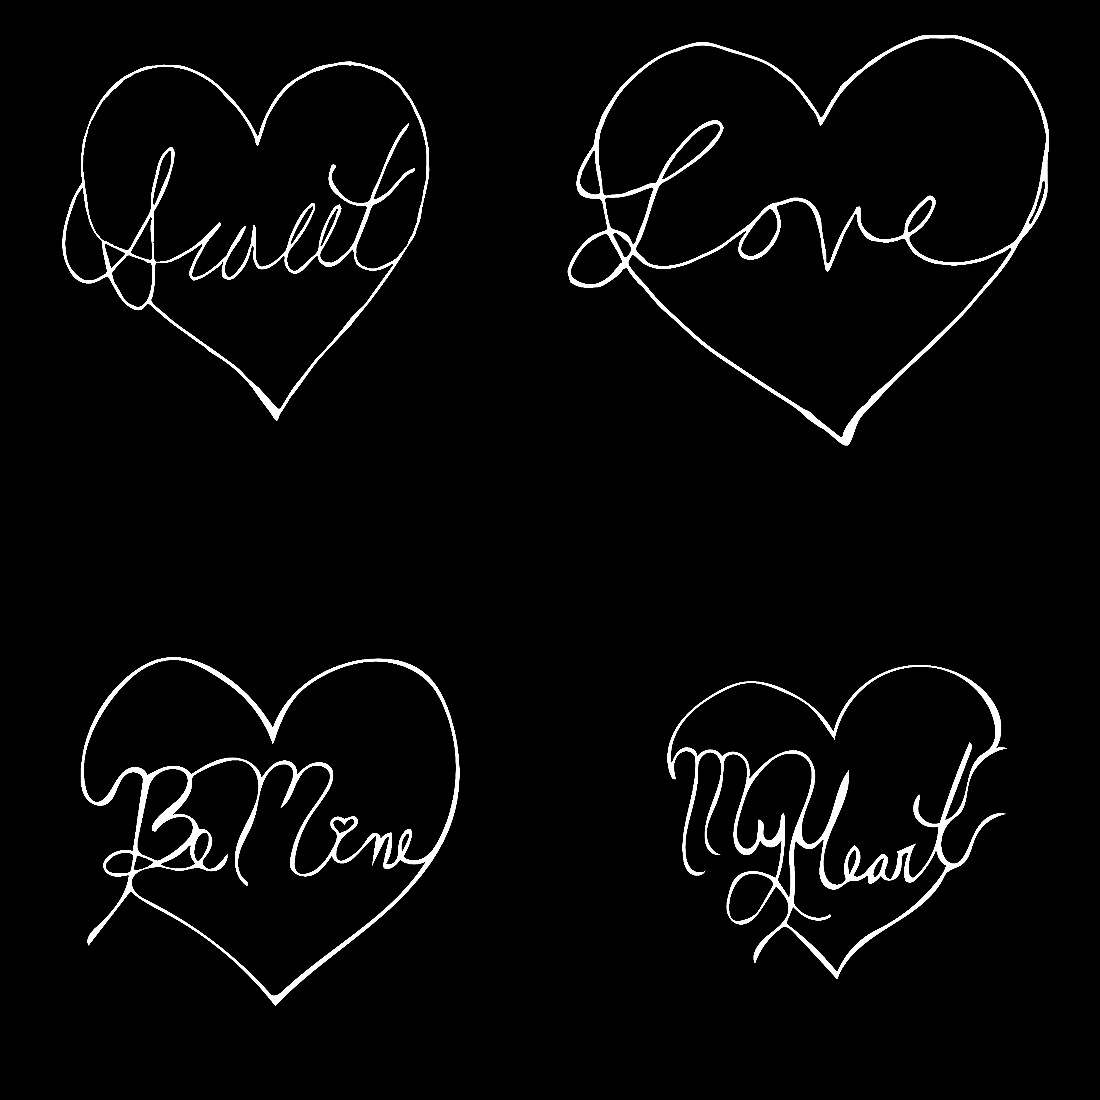 White Heart Shaped Valentine Day\'s Words Cutouts Set of 5 cover image.